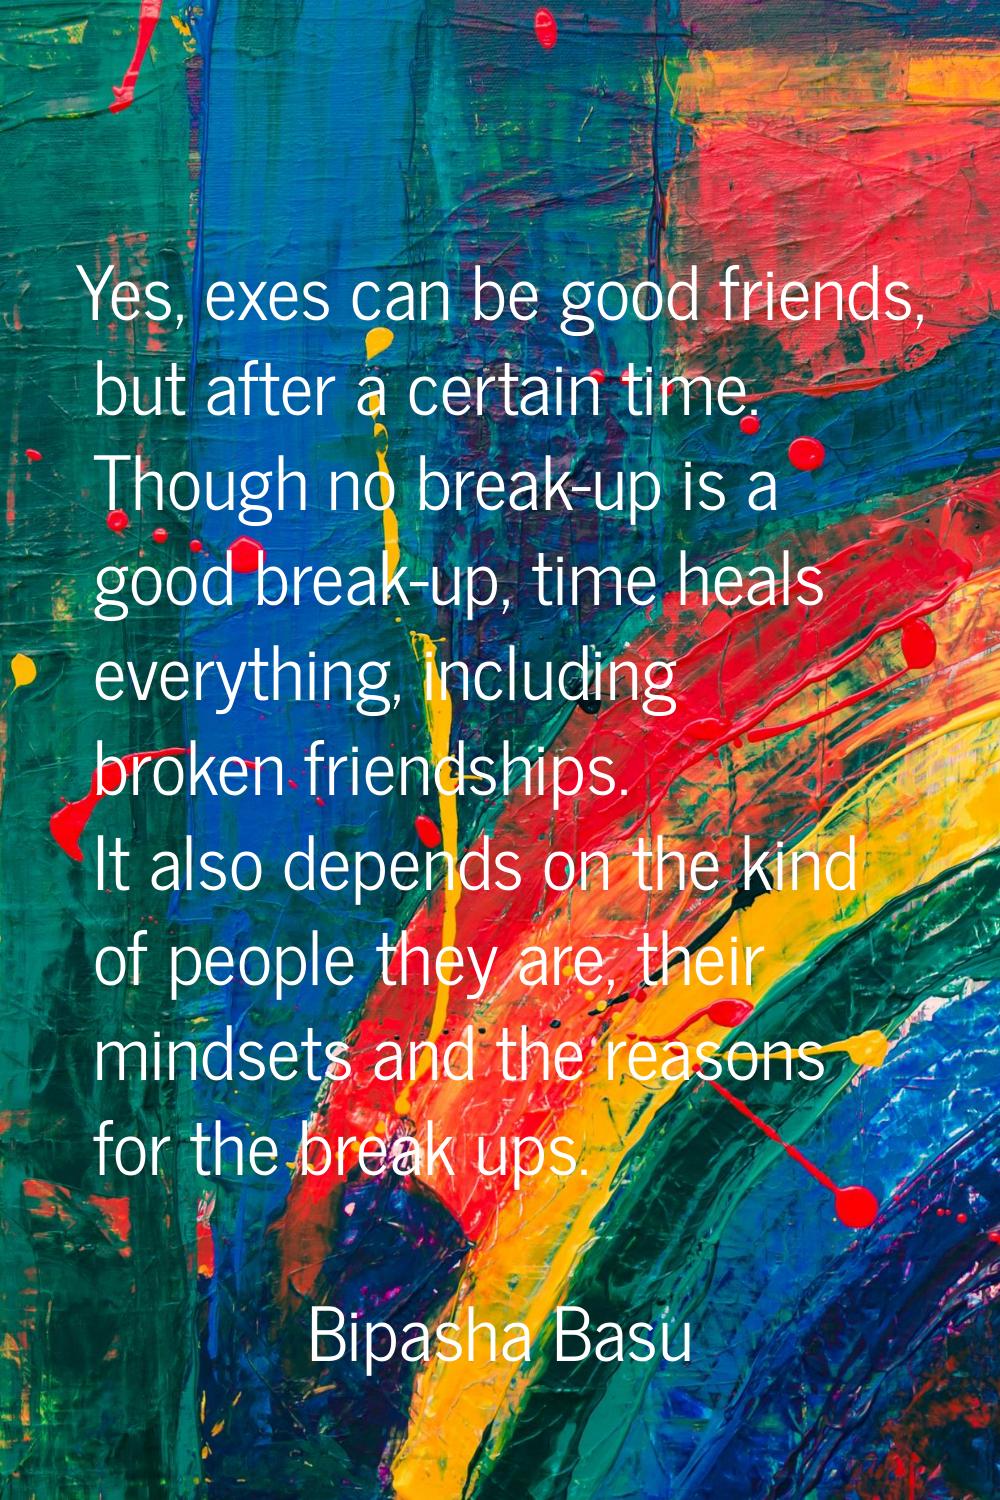 Yes, exes can be good friends, but after a certain time. Though no break-up is a good break-up, tim